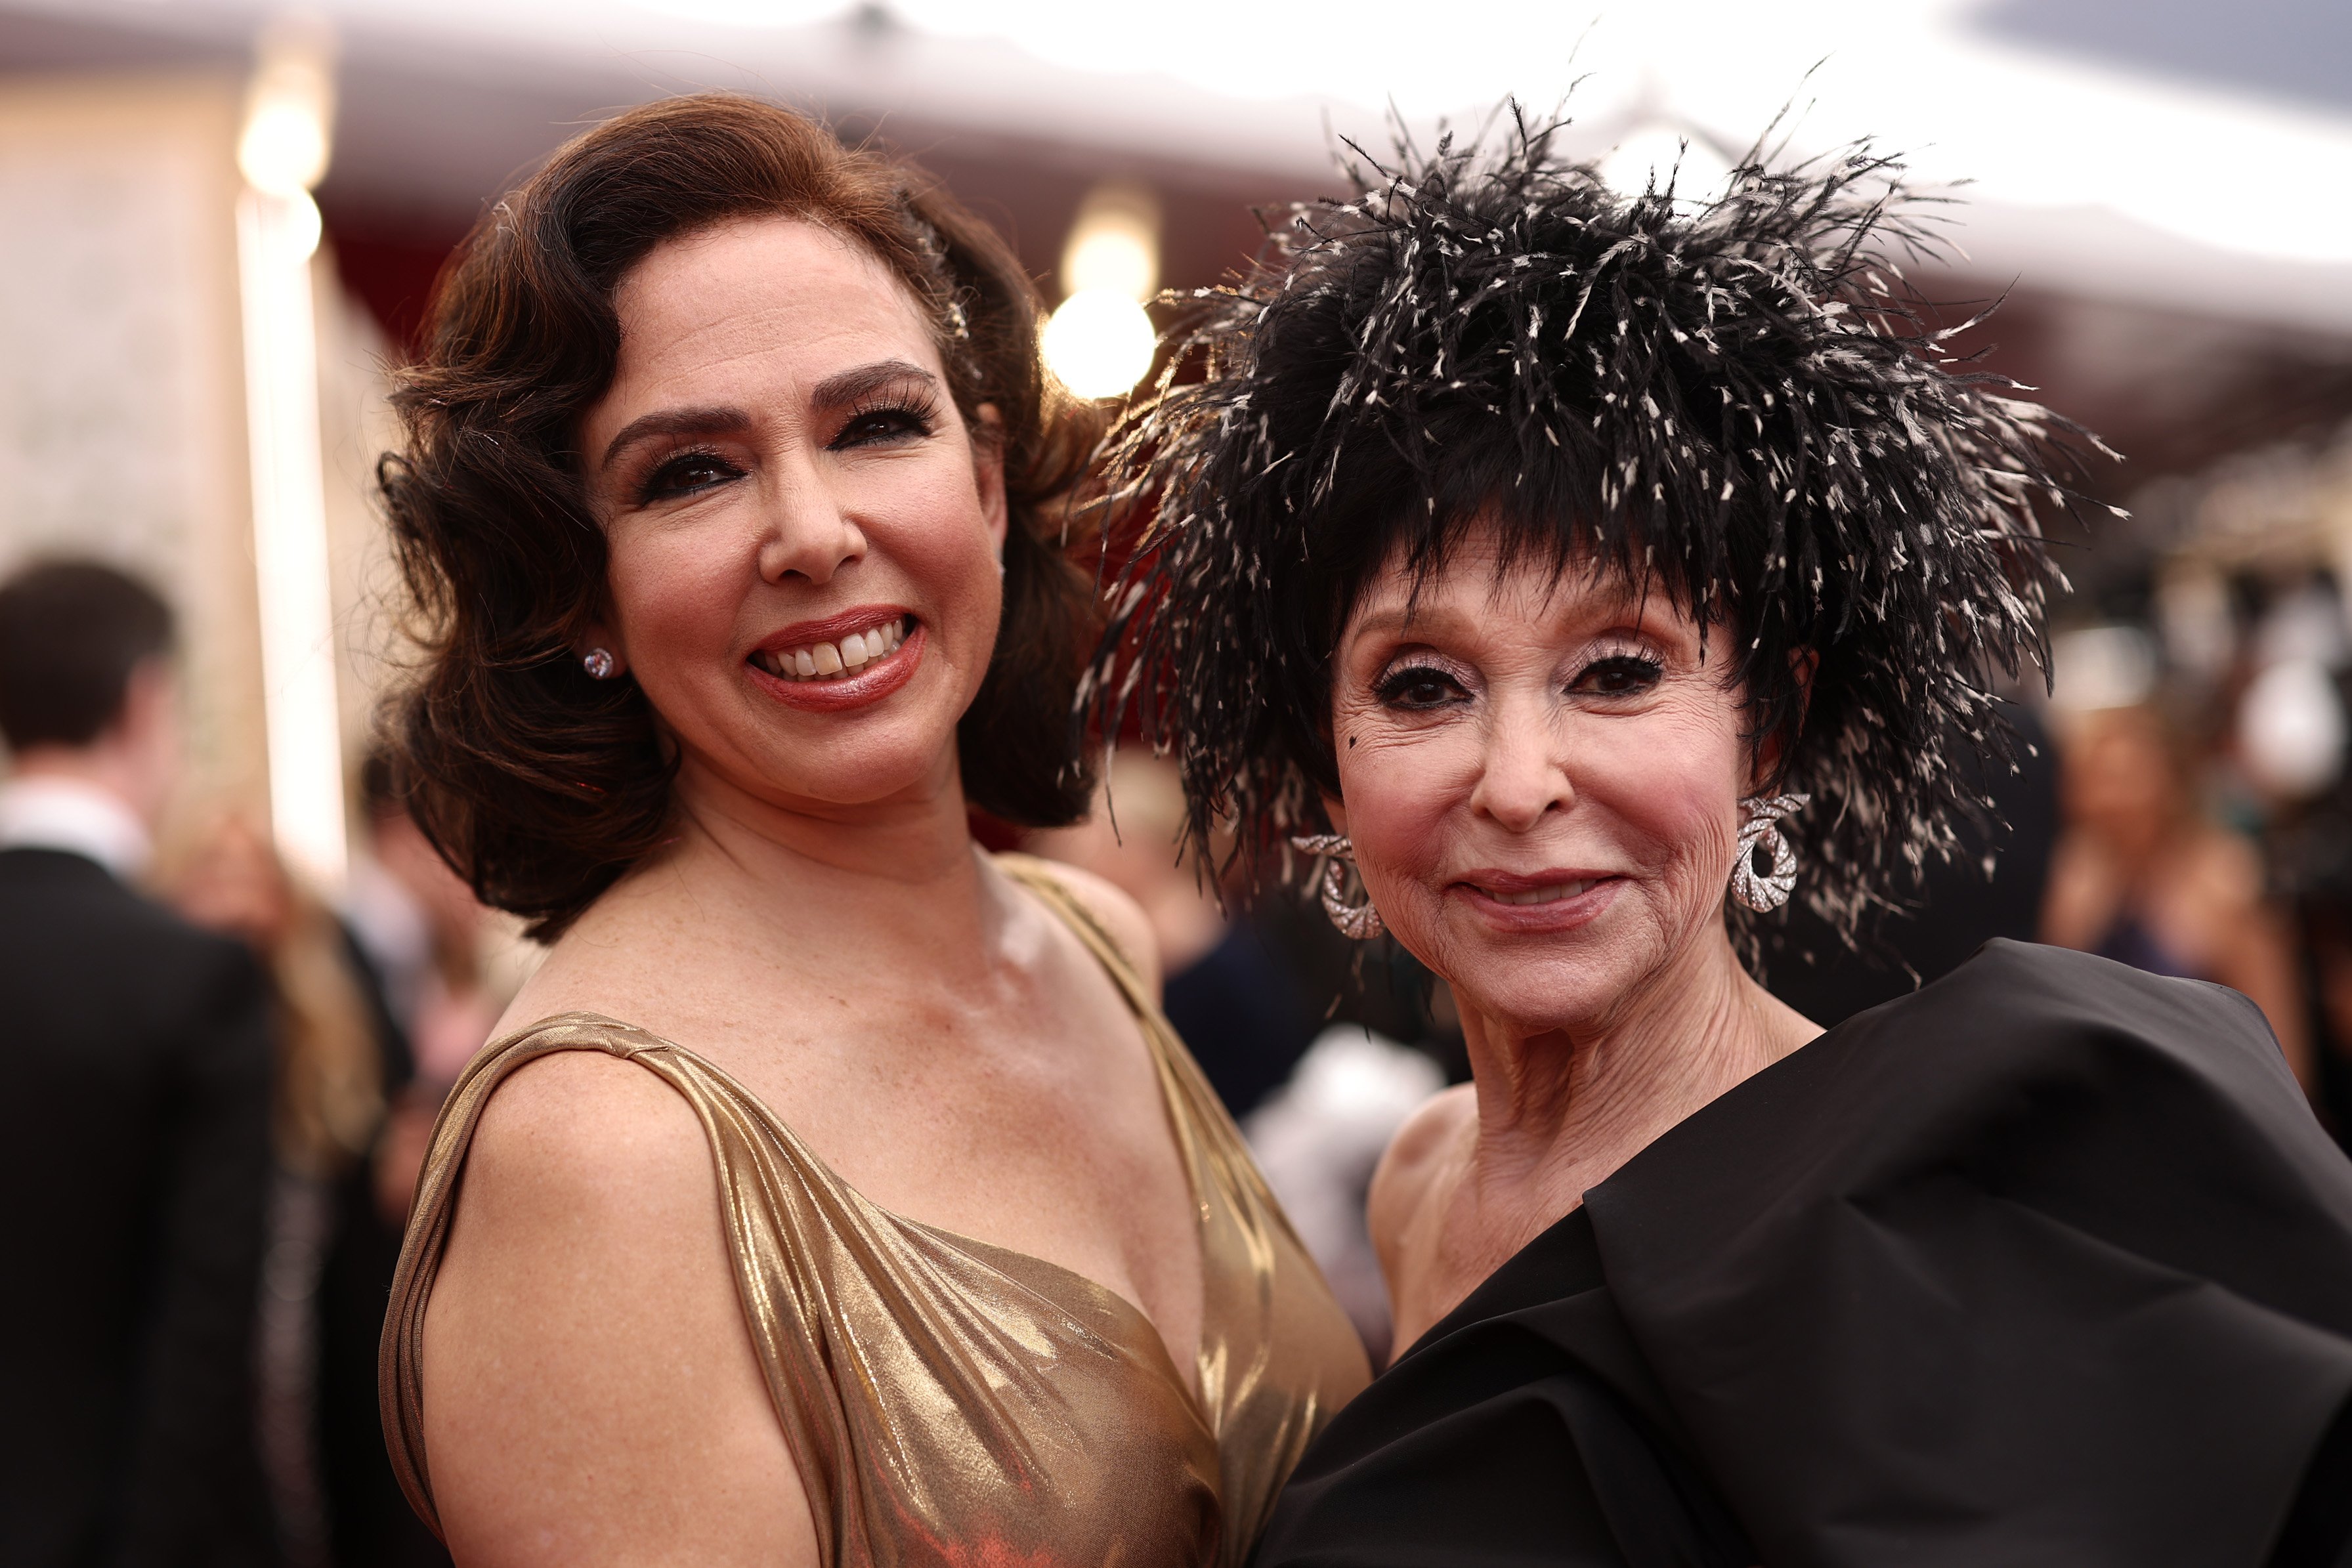 Fernanda Luisa Gordon and Rita Moreno at Hollywood and Highland on March 27, 2022. | Source: Getty Images